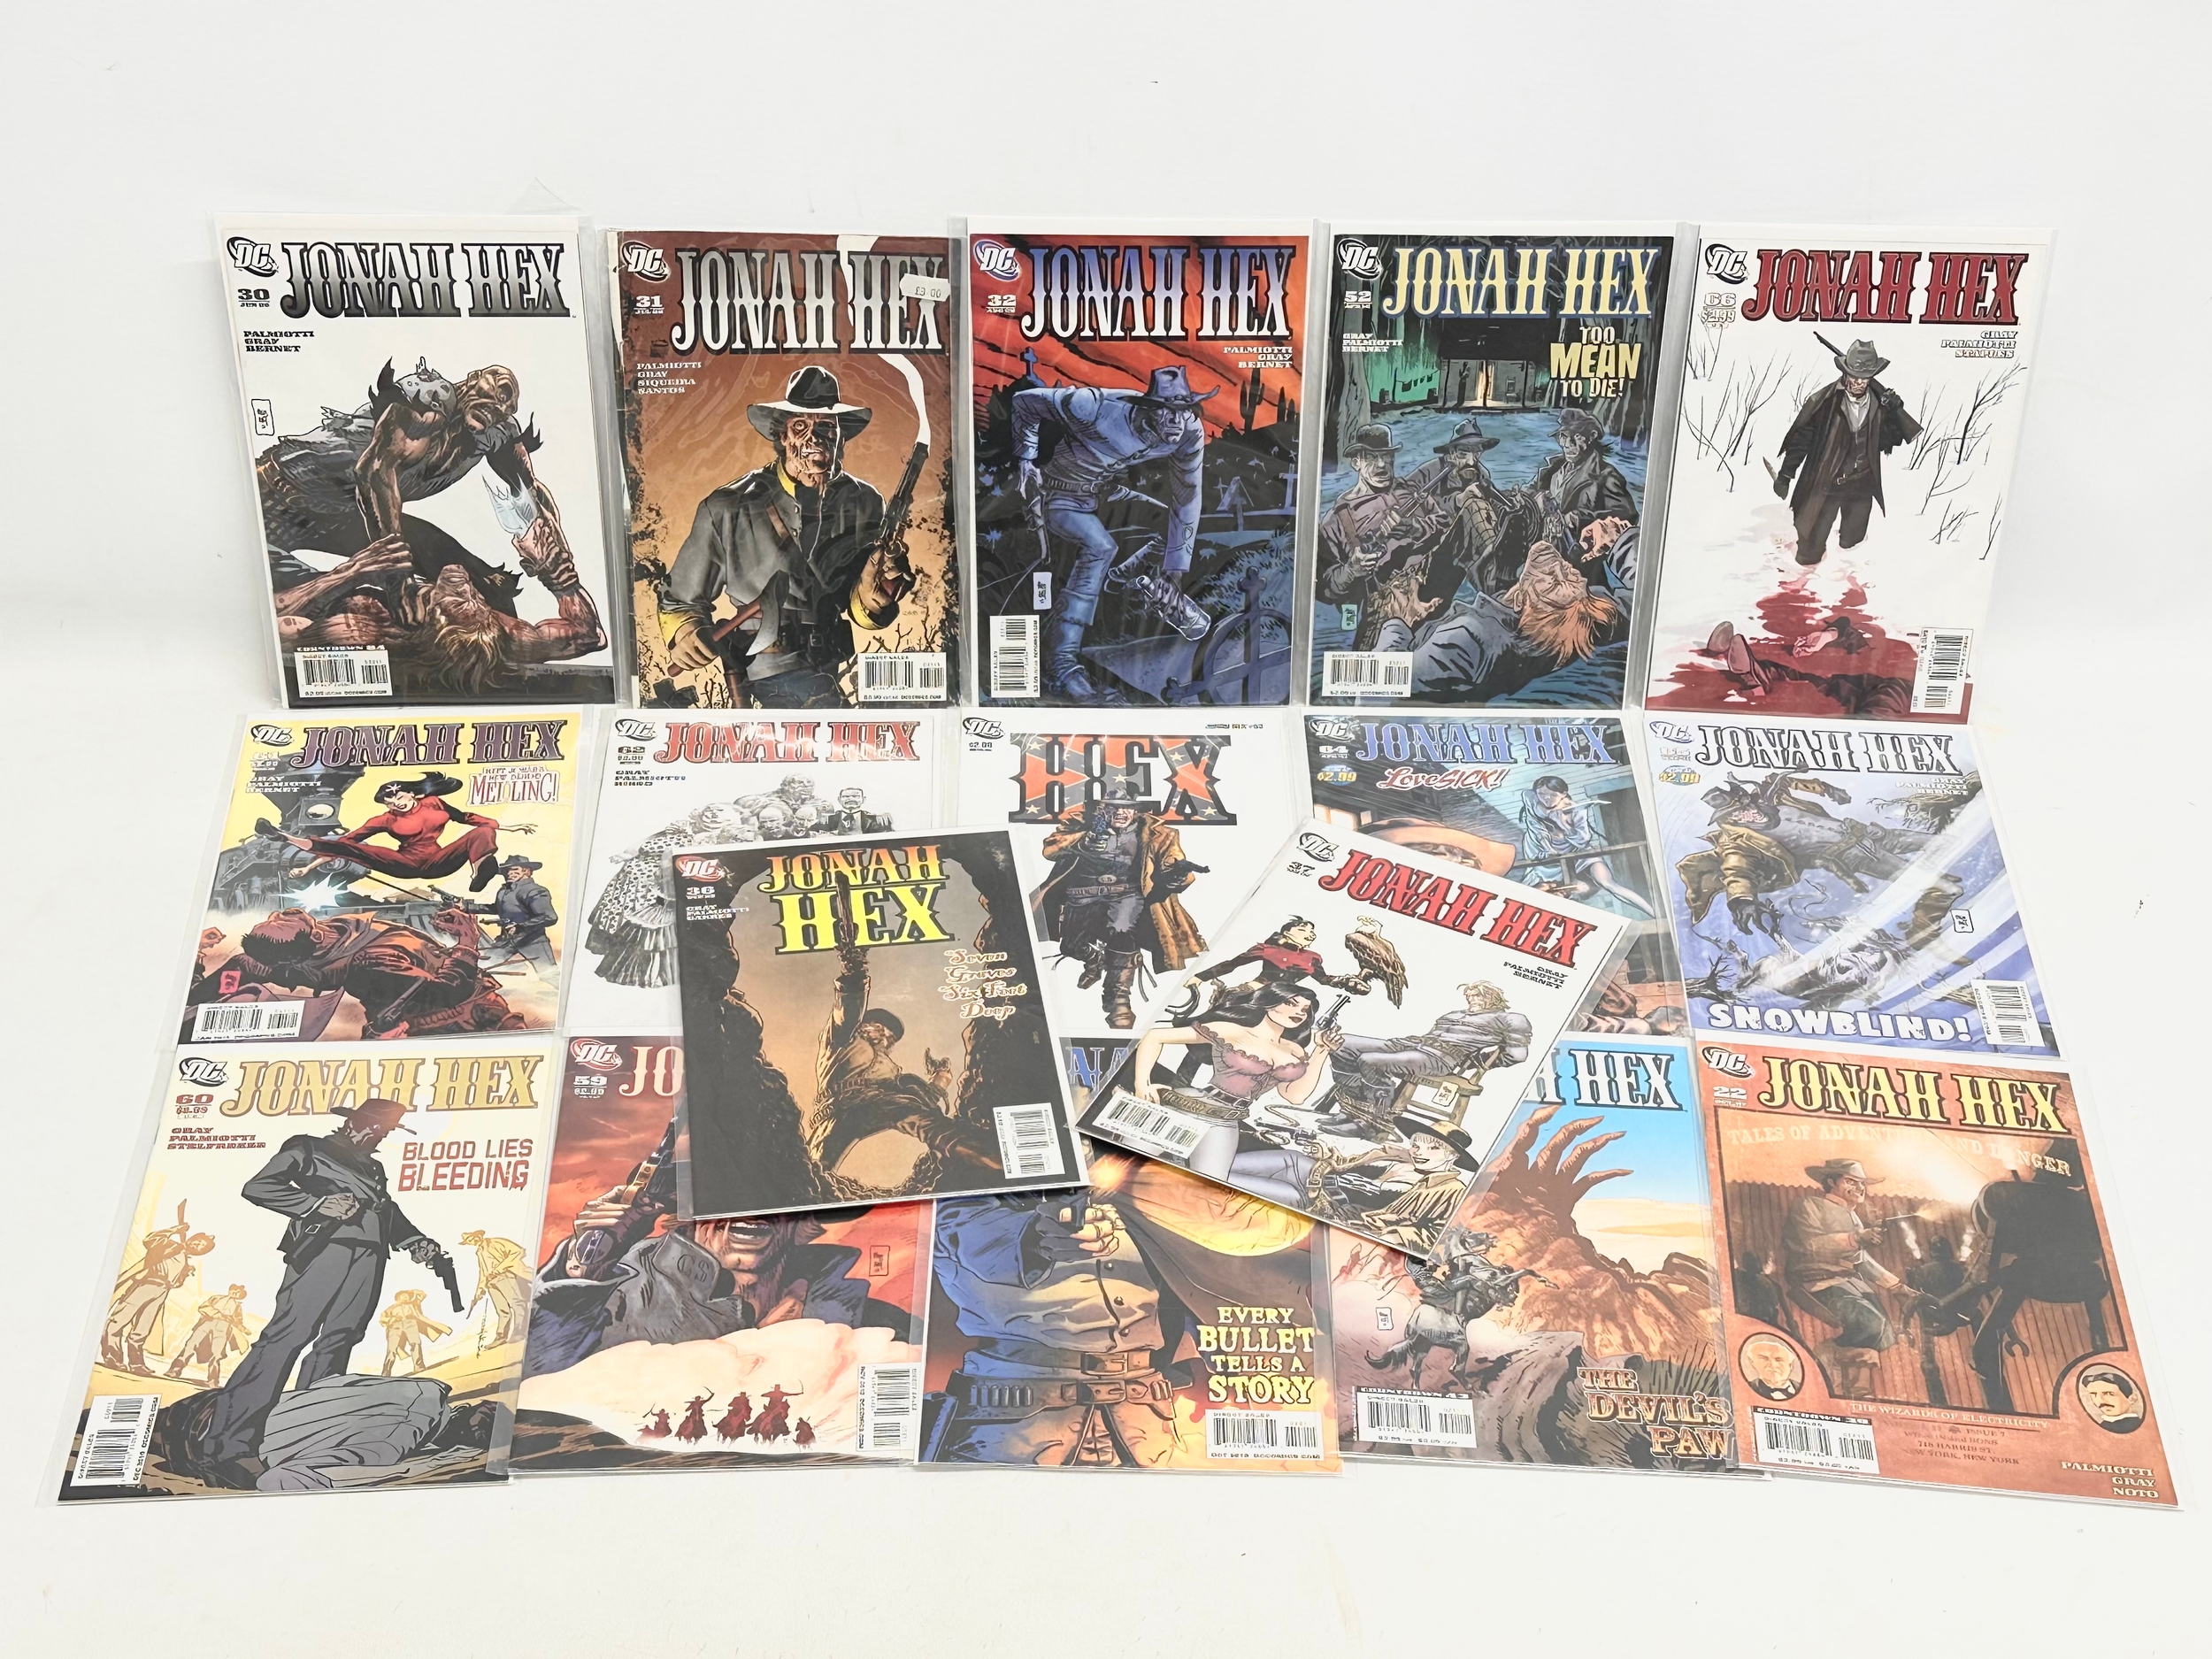 A collection of DC Jonah Hex comics.